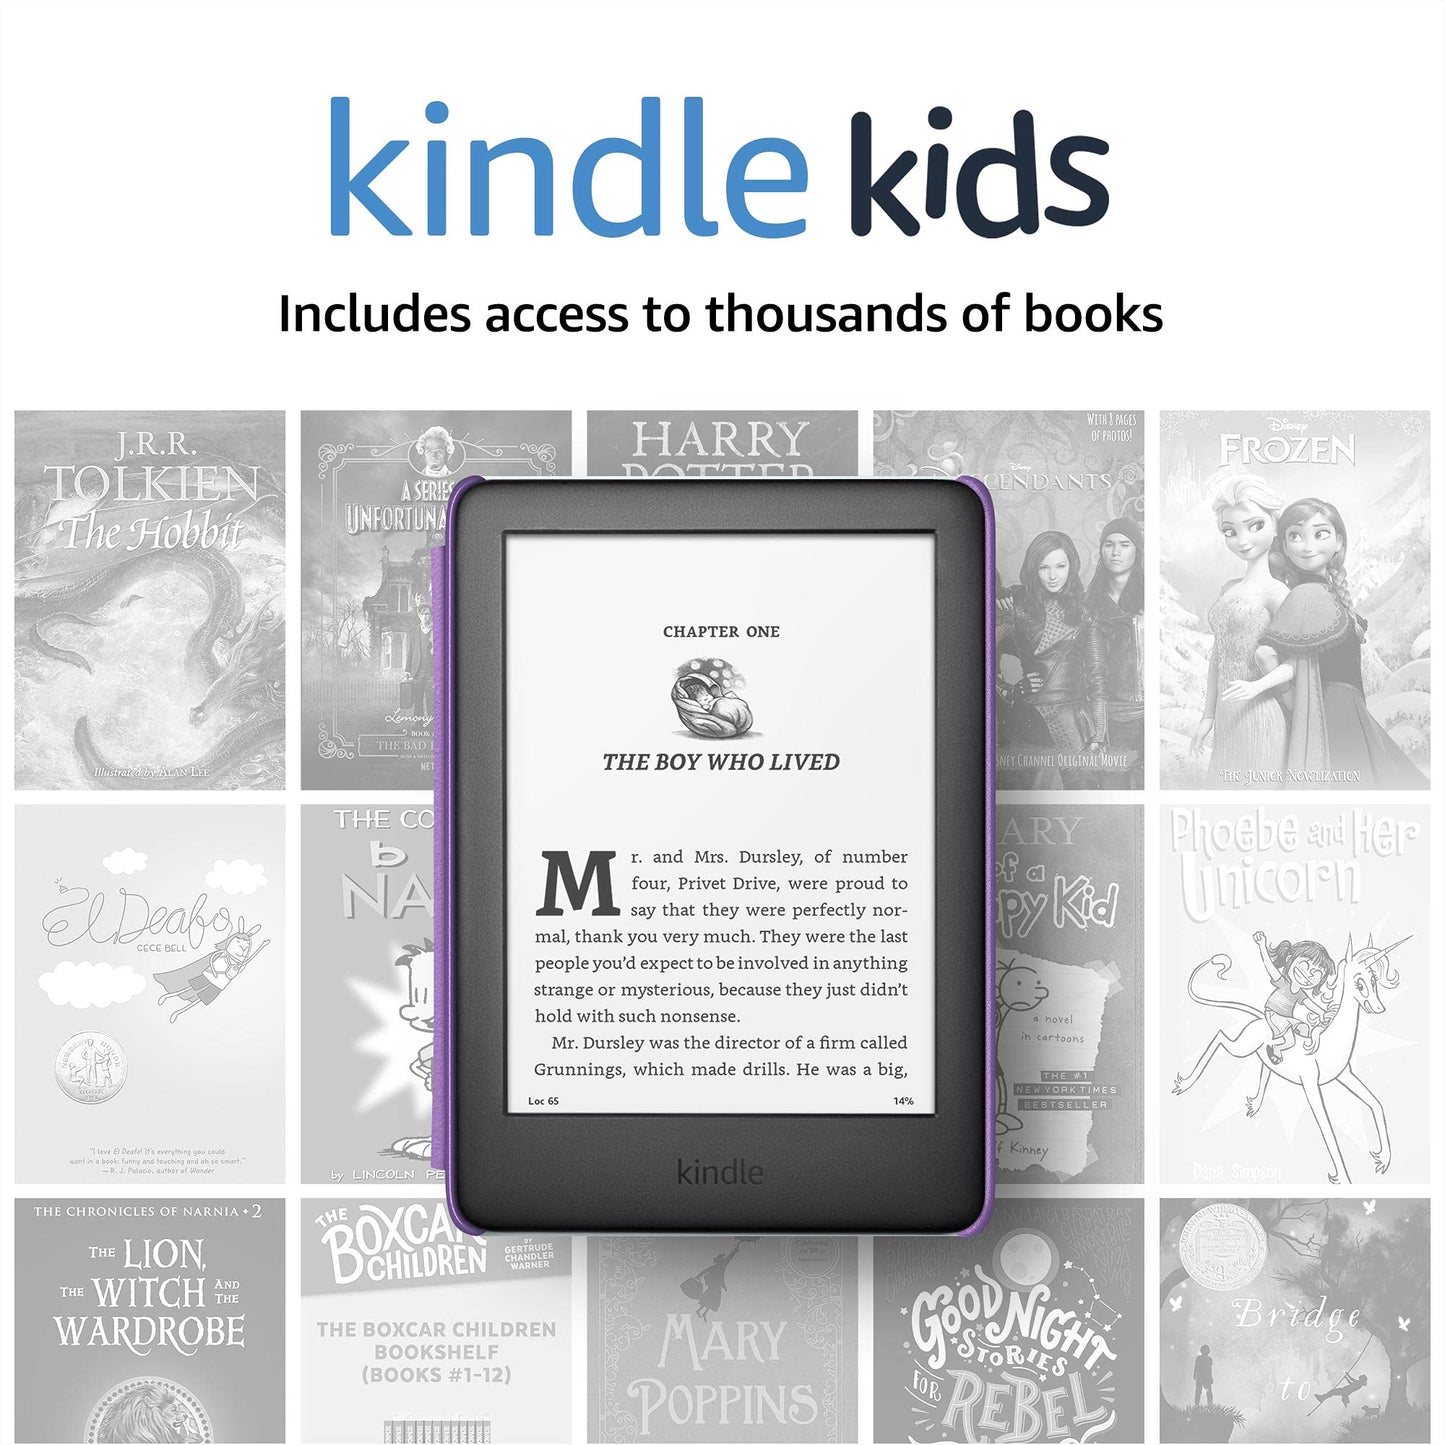 Kindle Kids, a Kindle designed for kids, with parental controls - Blue Cover